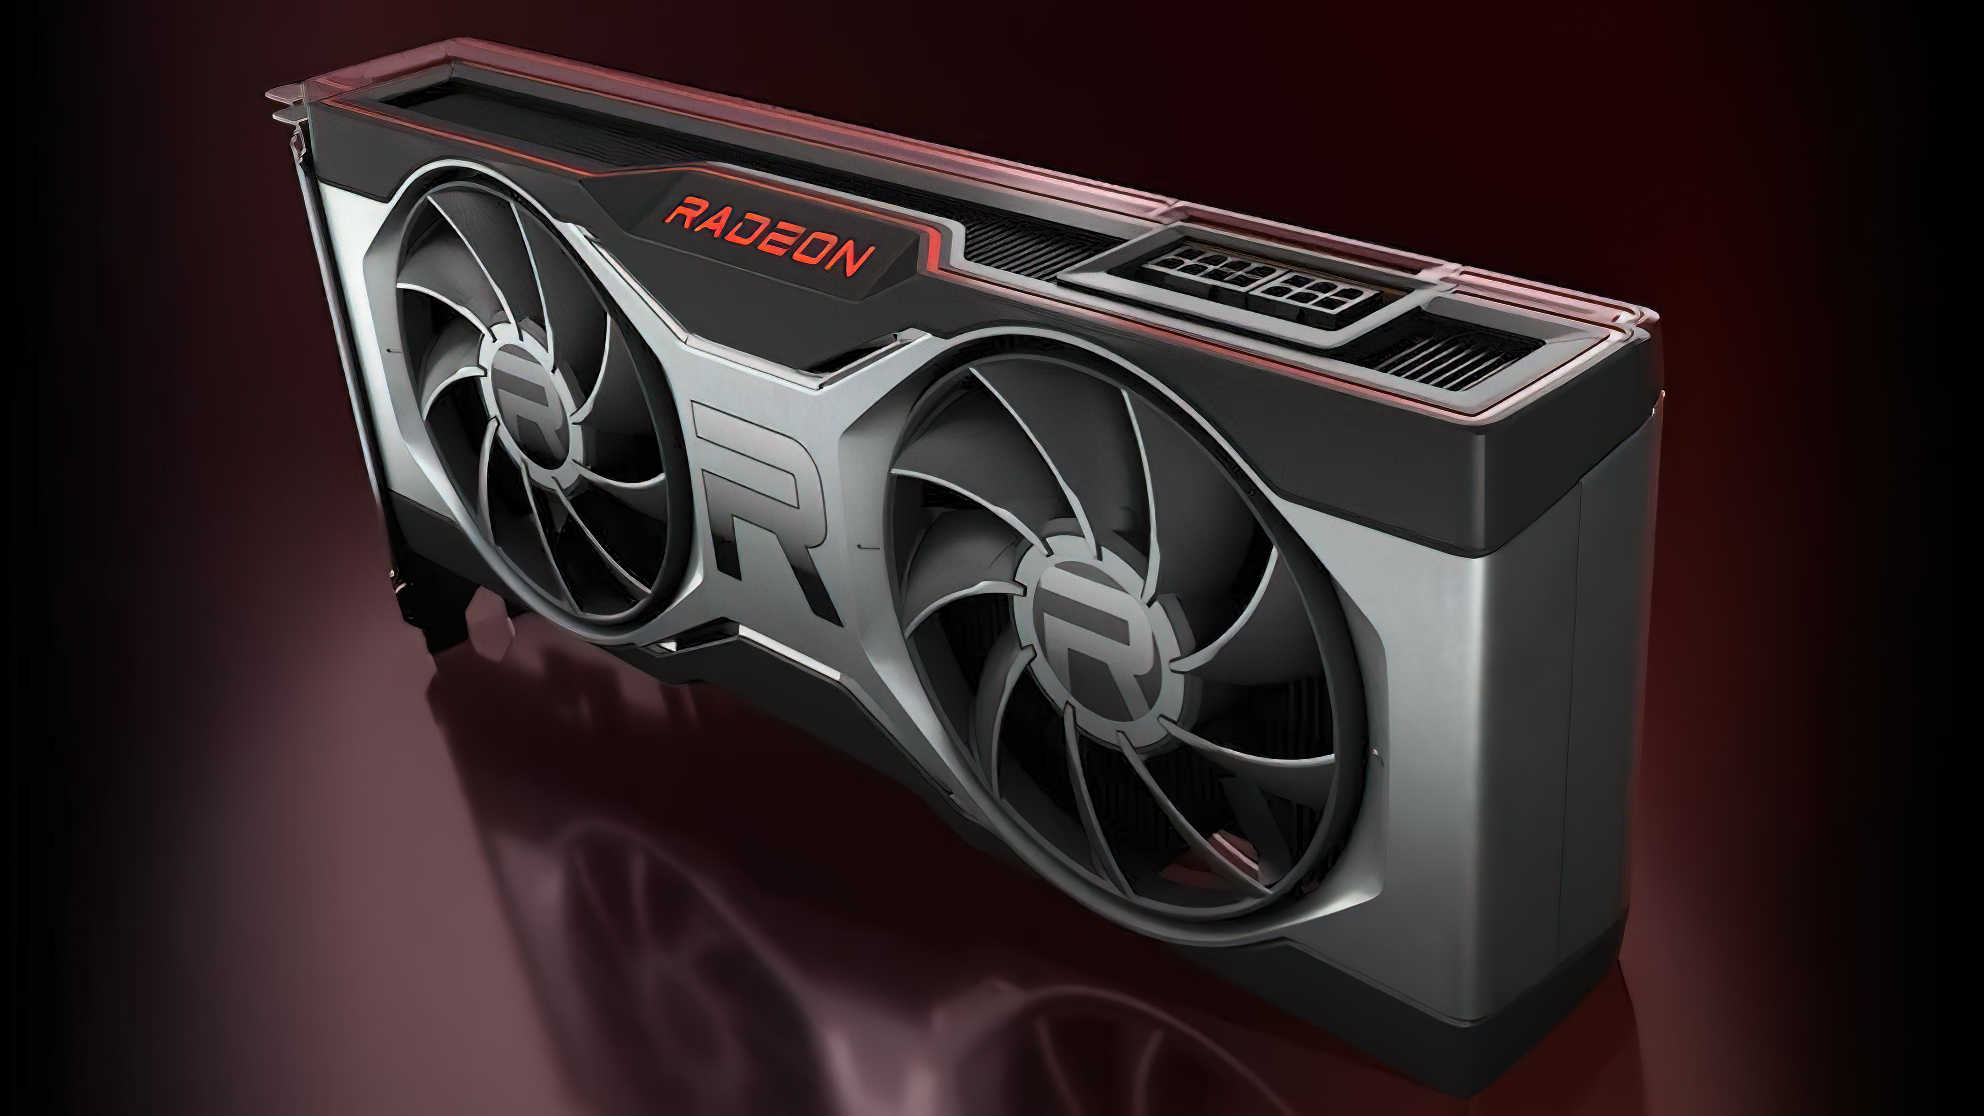 AMD Radeon RX 6700XT review: If another sold-out GPU falls in the forest…